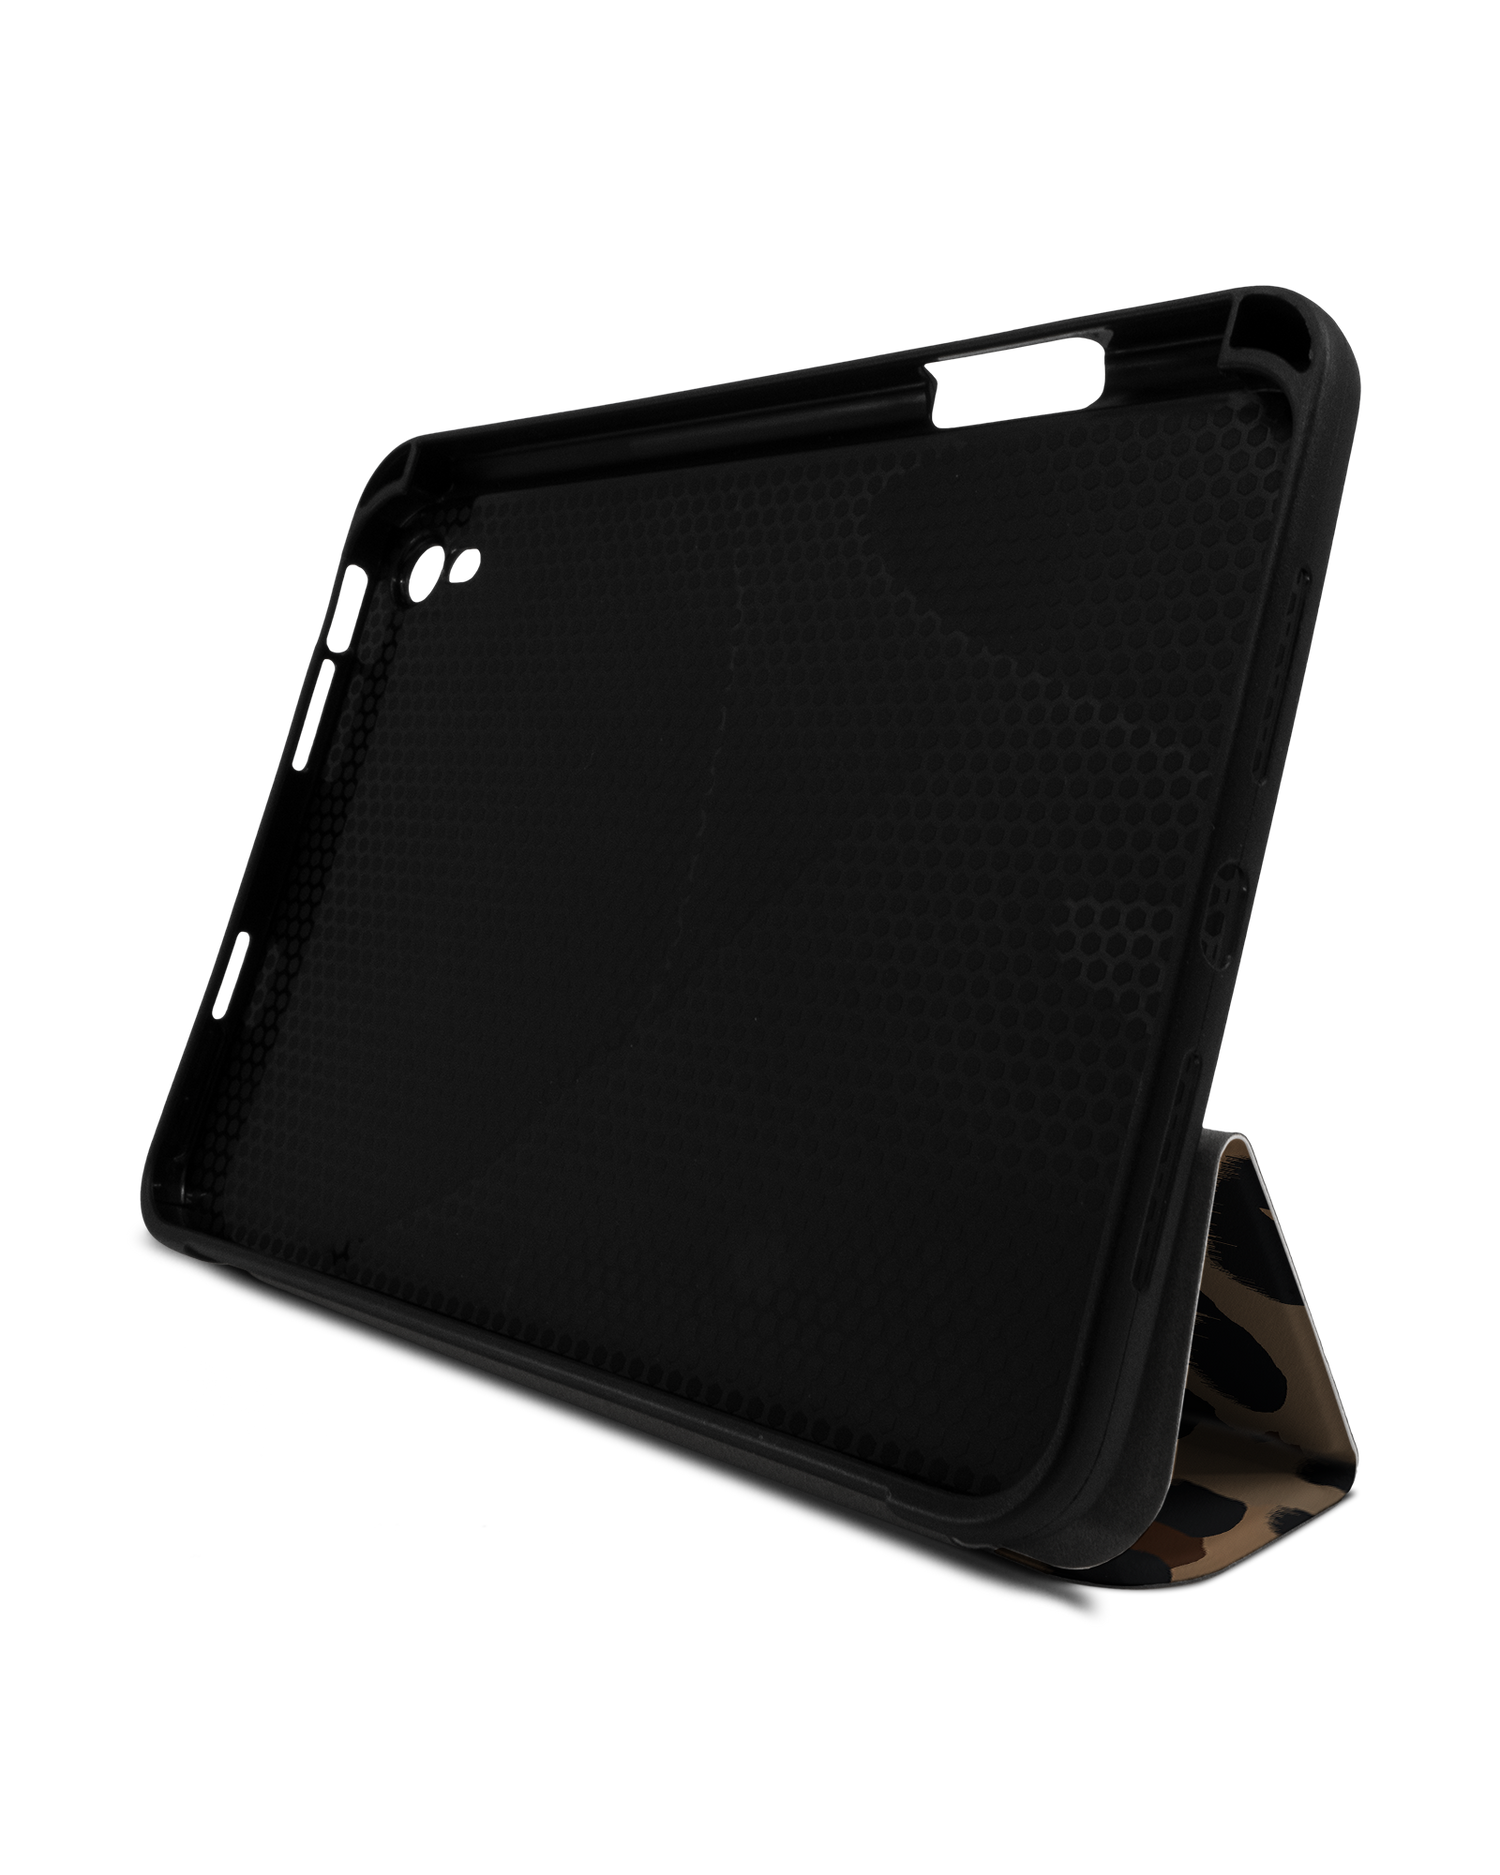 Leopard Repeat iPad Case with Pencil Holder Apple iPad mini 6 (2021): Set up in landscape format (front view)